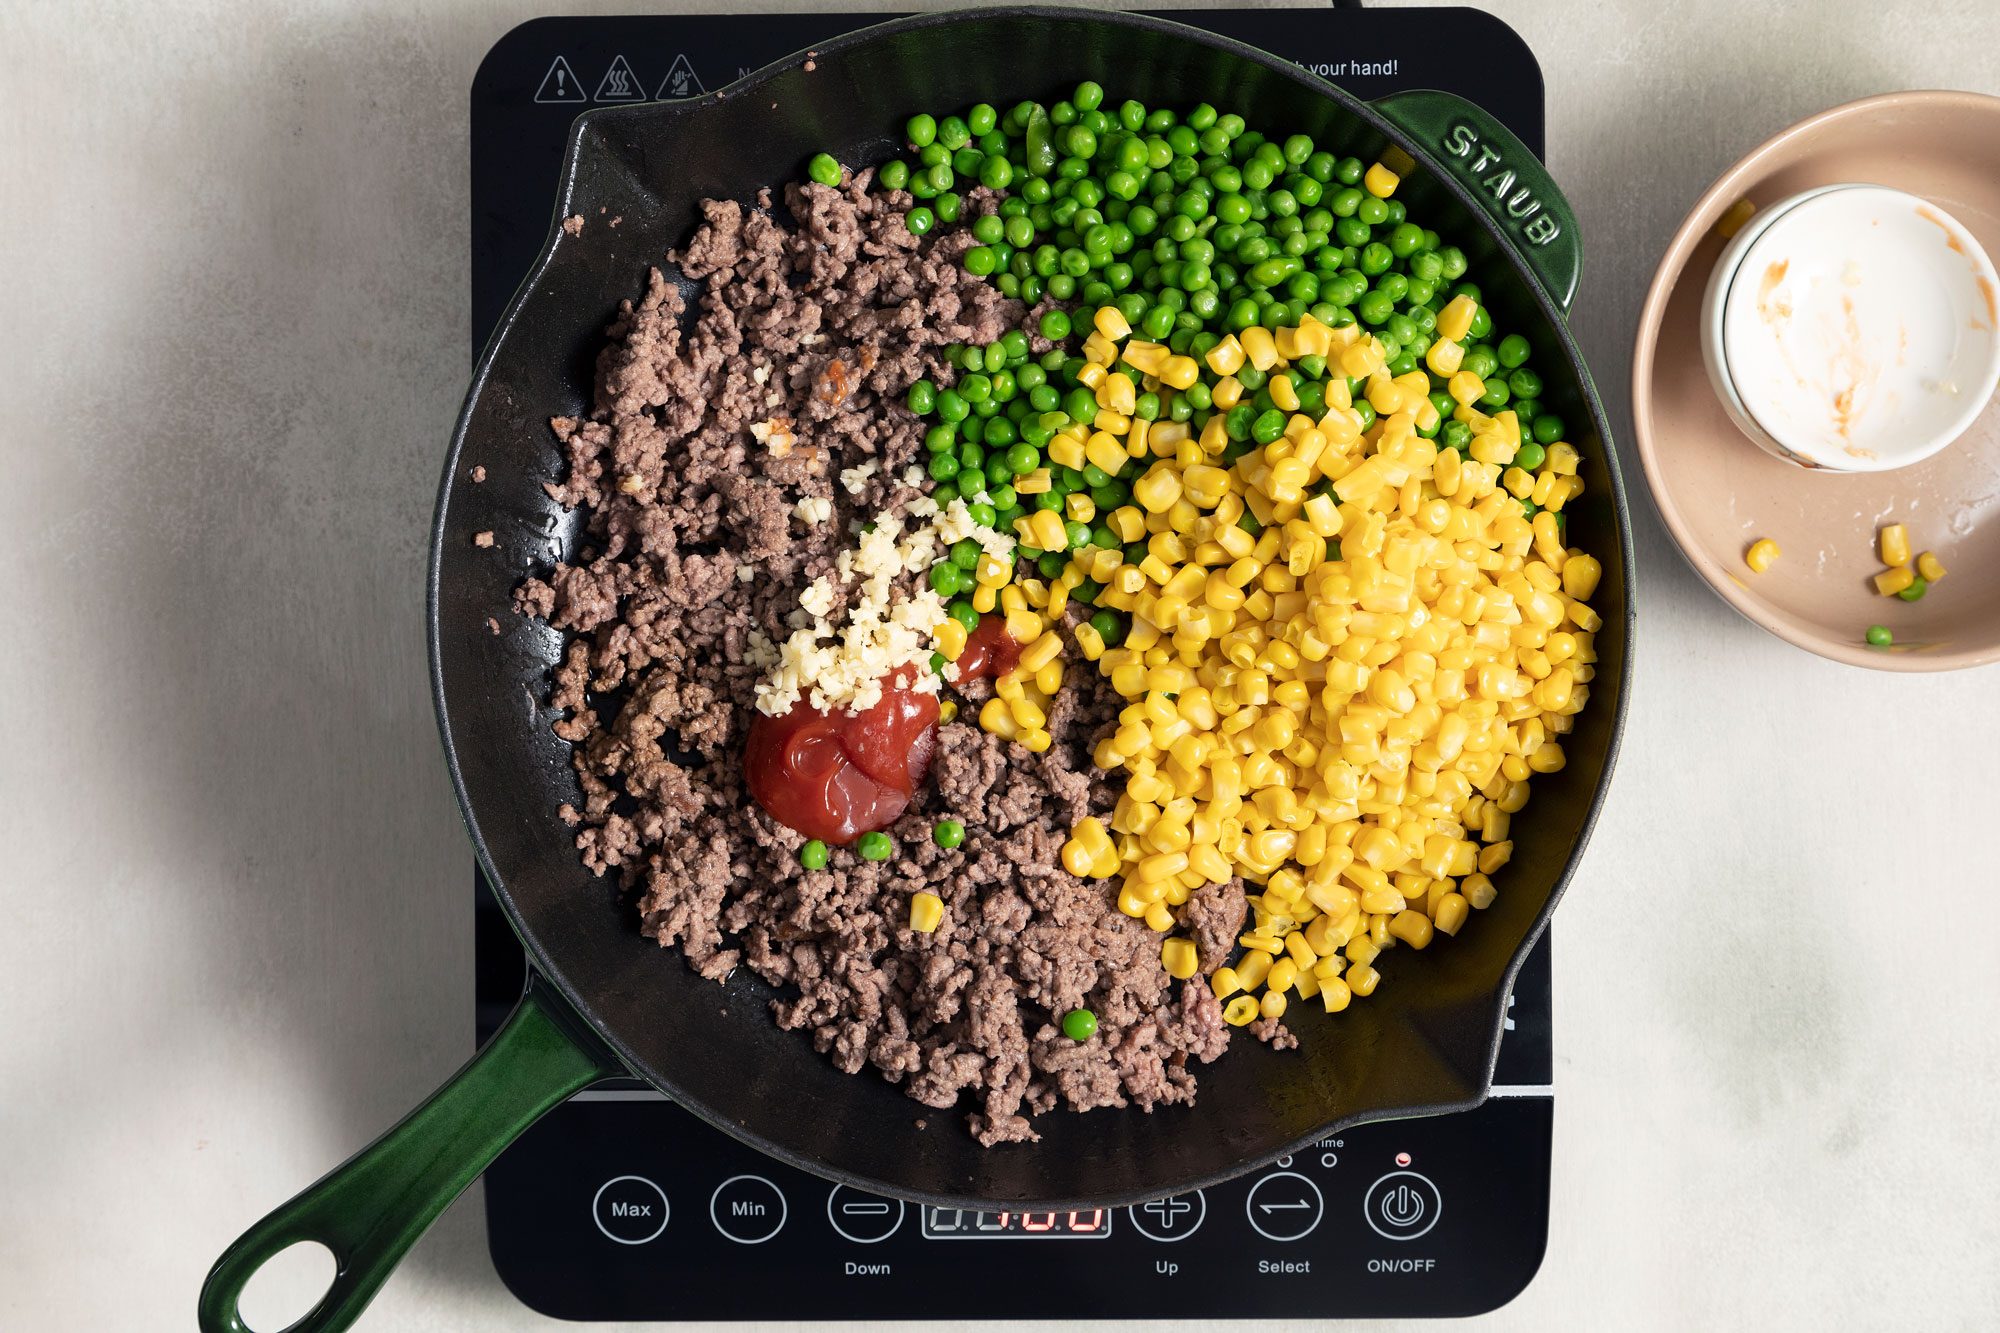 cooked beef, corn, peas, ketchup and garlic in a large skillet on induction cooktop